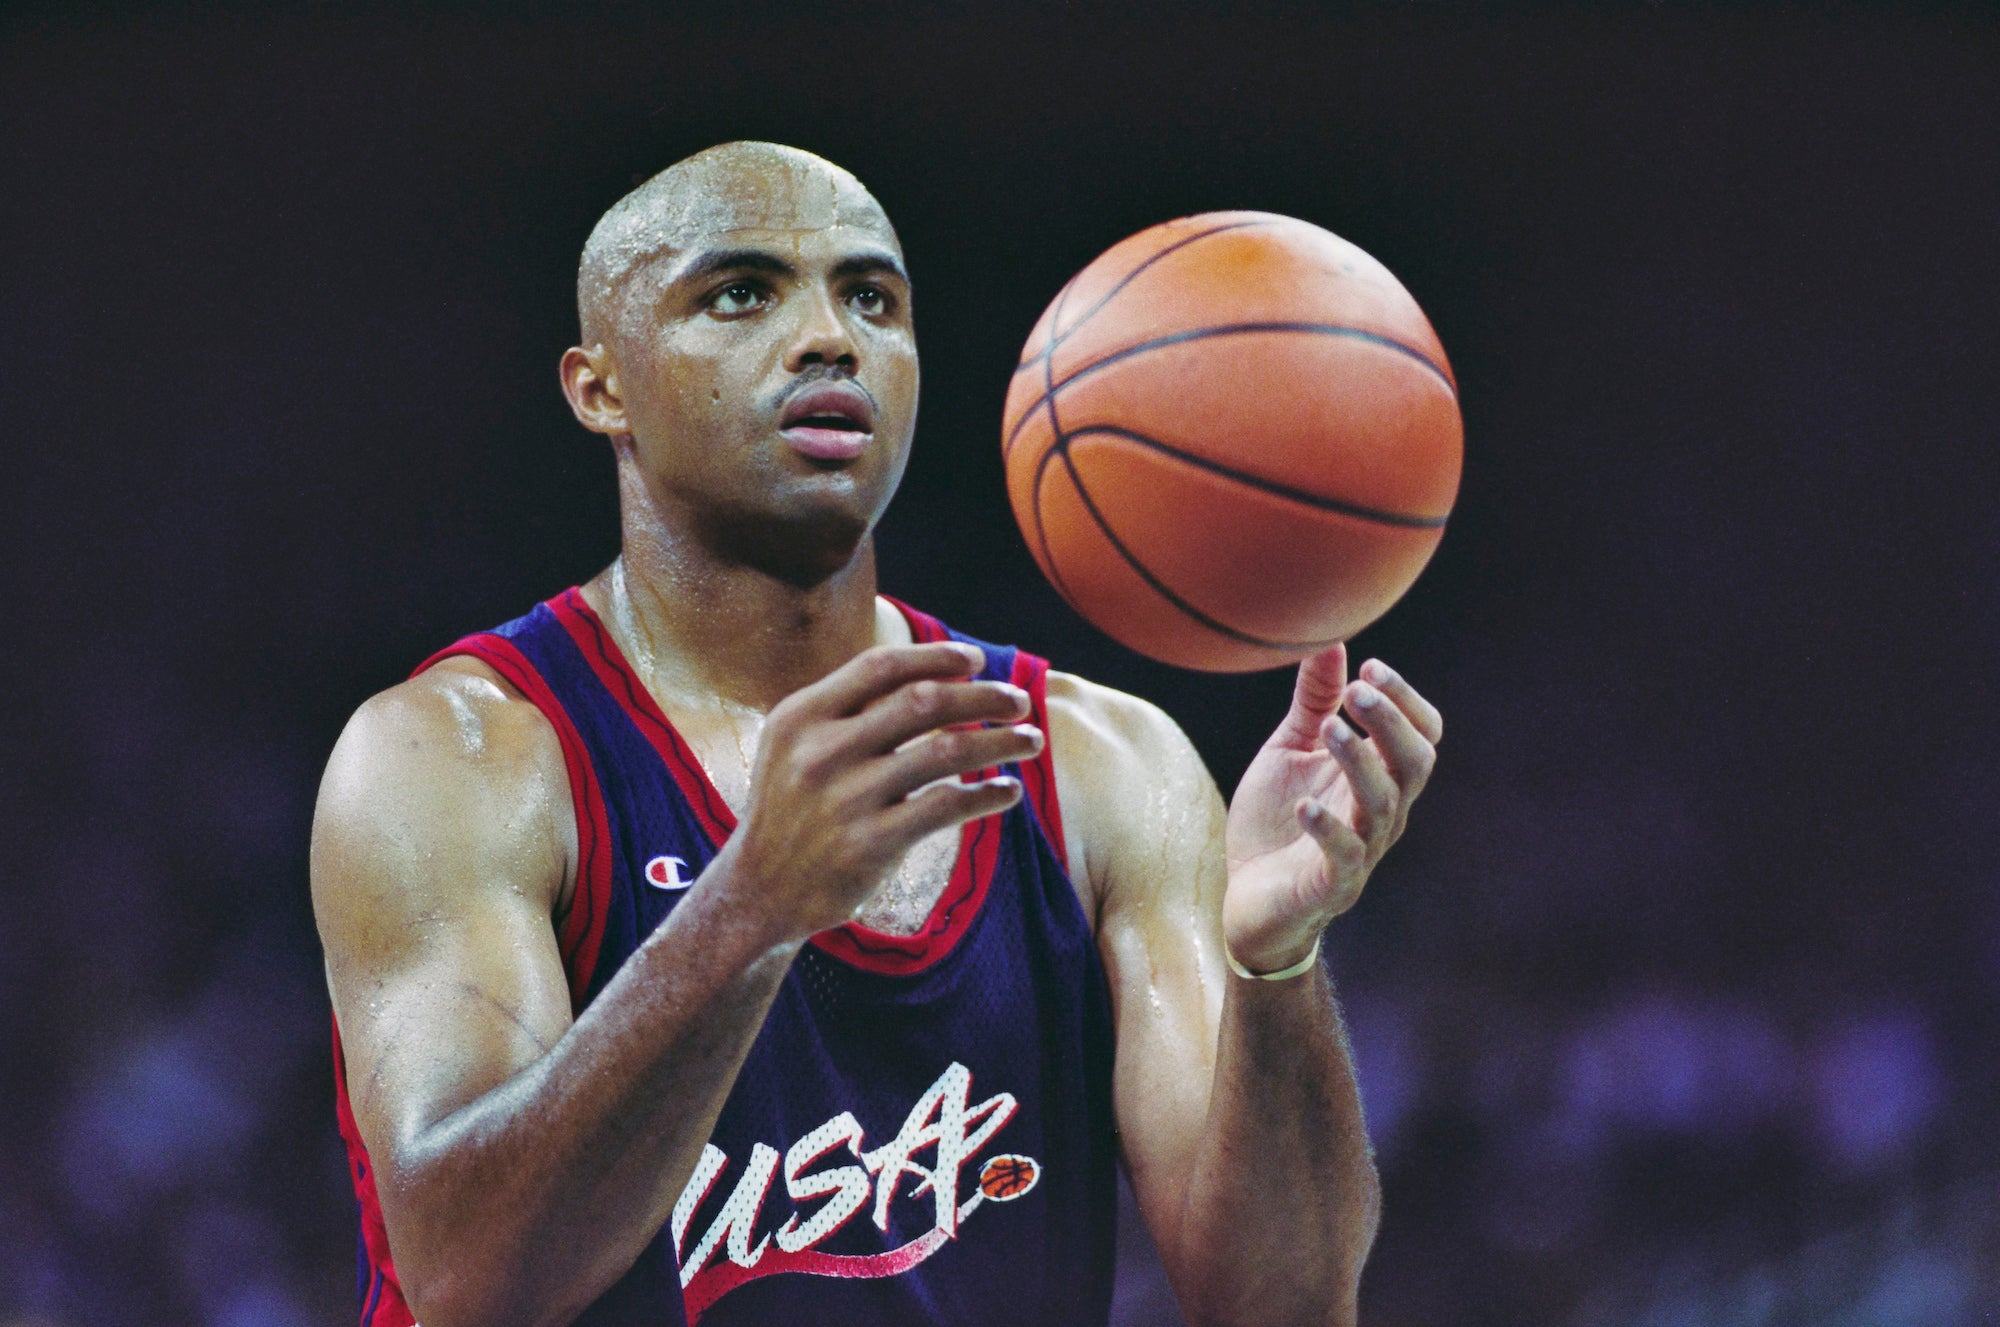 Charles Barkley Believes He Was The 2nd Best Player On The 1992